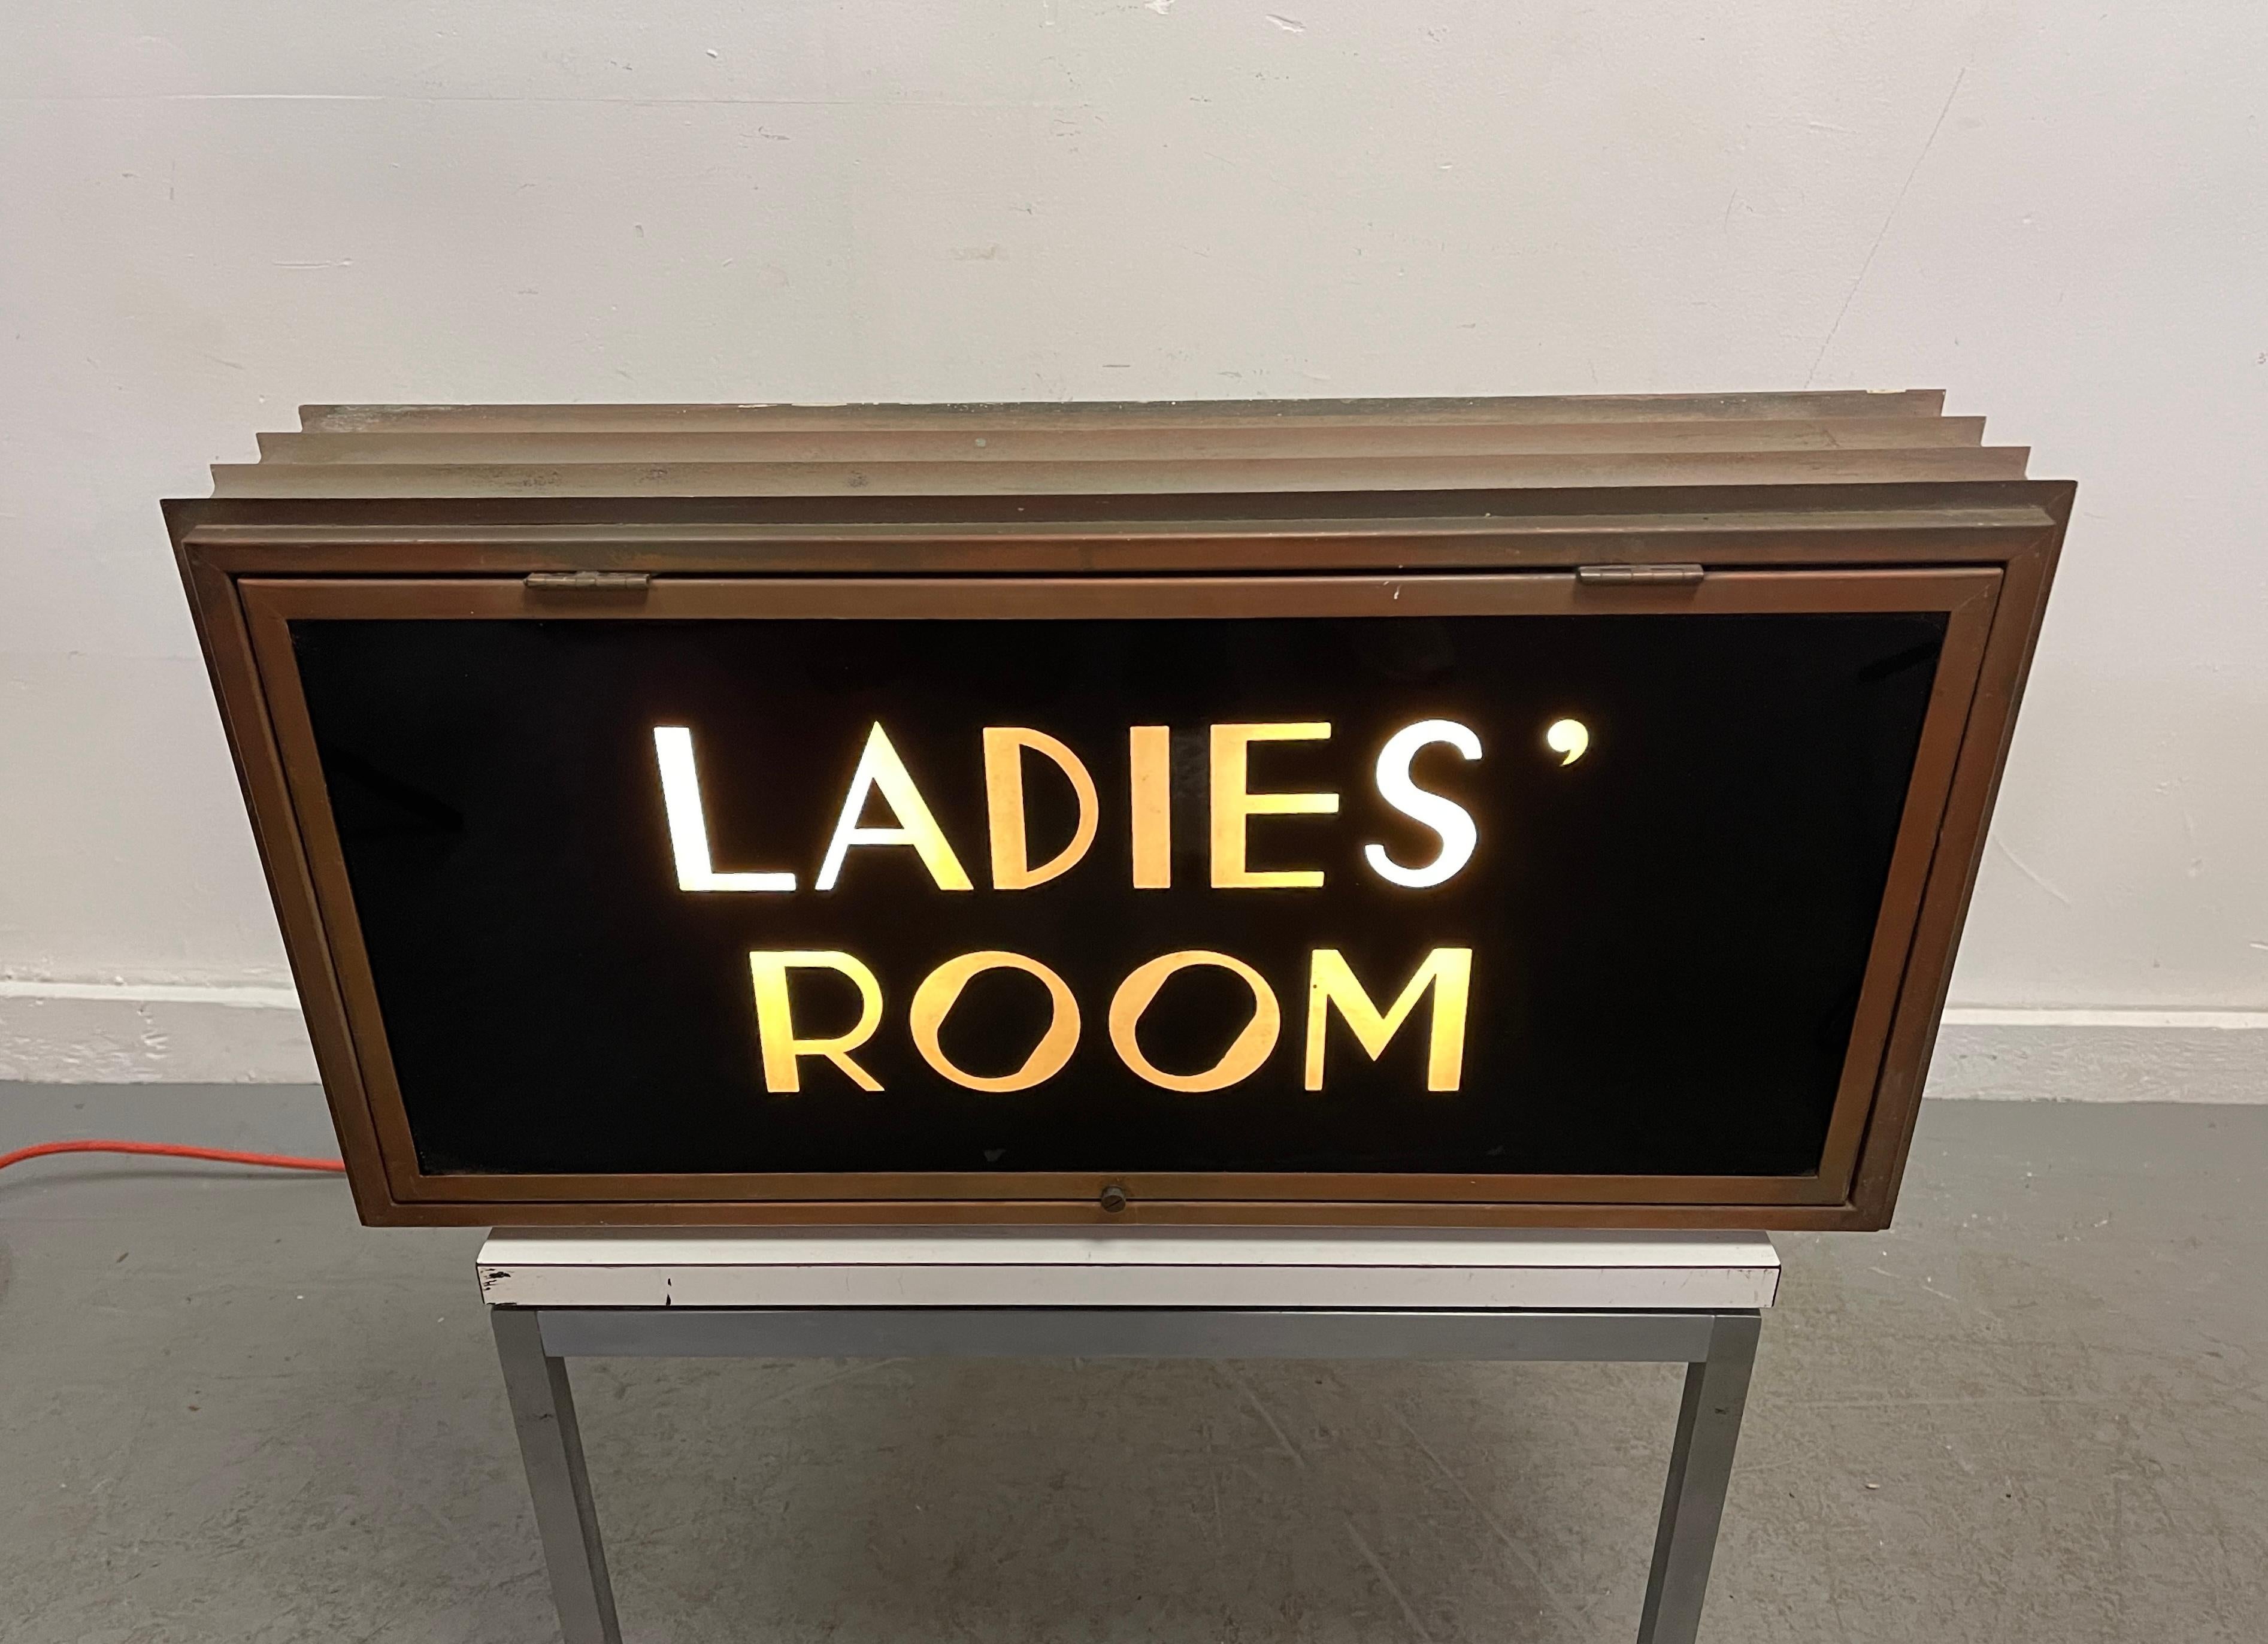 Seldom seen Art Deco bronze and glass light up sign salvaged from an 